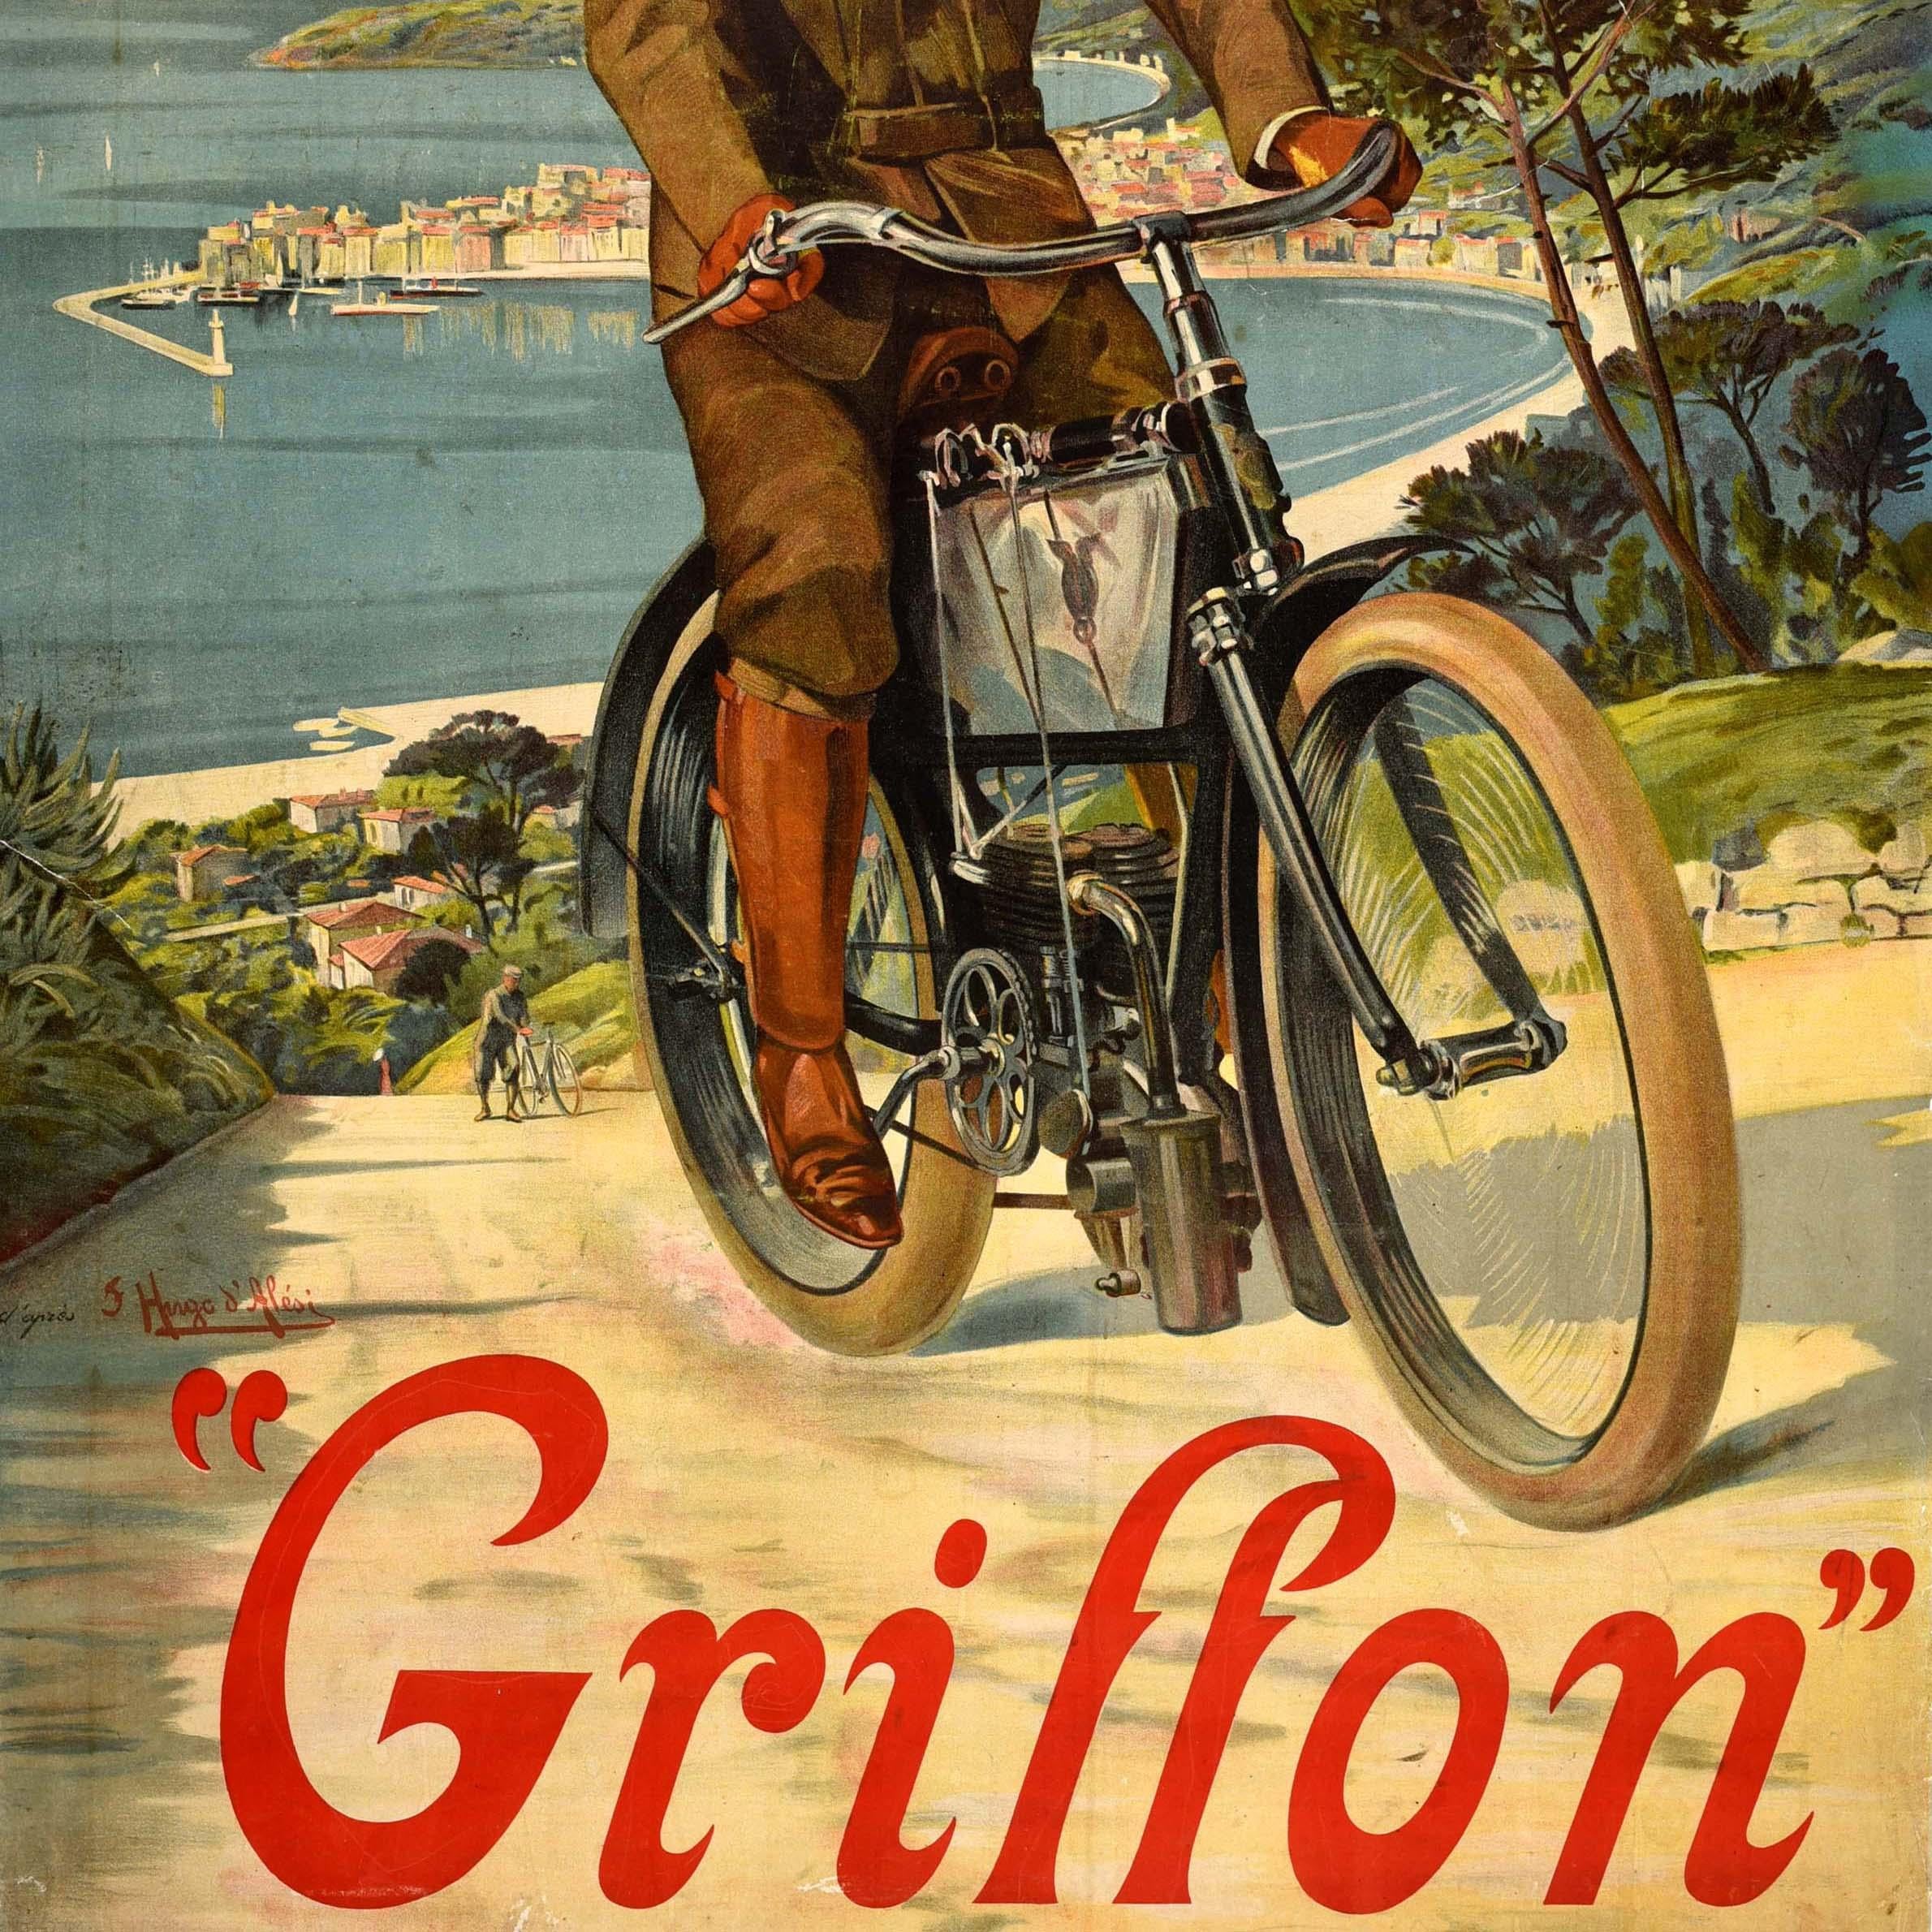 Original antique advertising poster for Griffon motorcycles featuring artwork by the French artist Frederic-Hugo de Alesi (1849-1906) showing a man with a moustache wearing gloves, boots and a cap, riding his motorised bike with ease up a hill, a